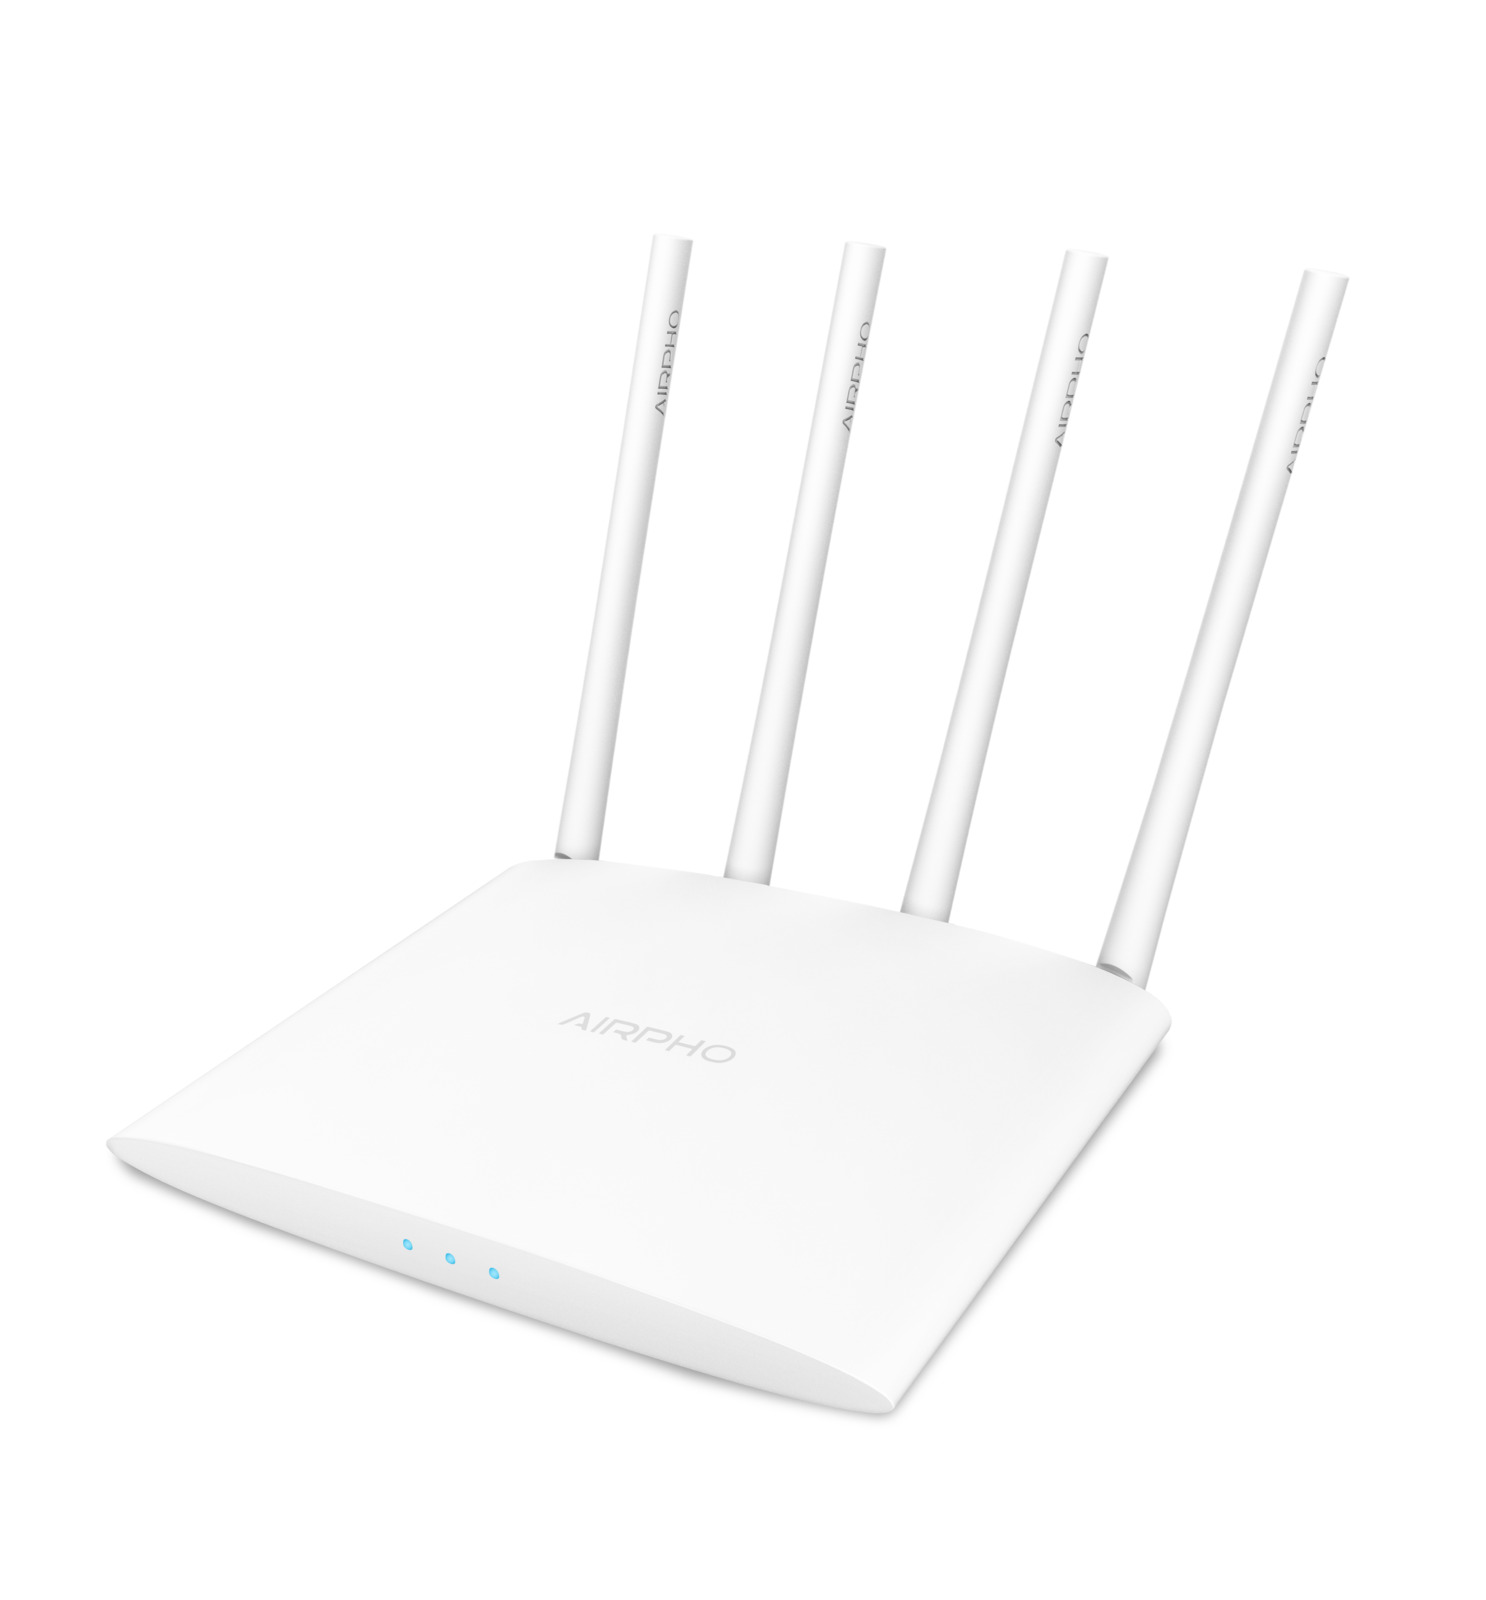 AIRPHO AR-W400 WLAN 1200 Mbit/s Router